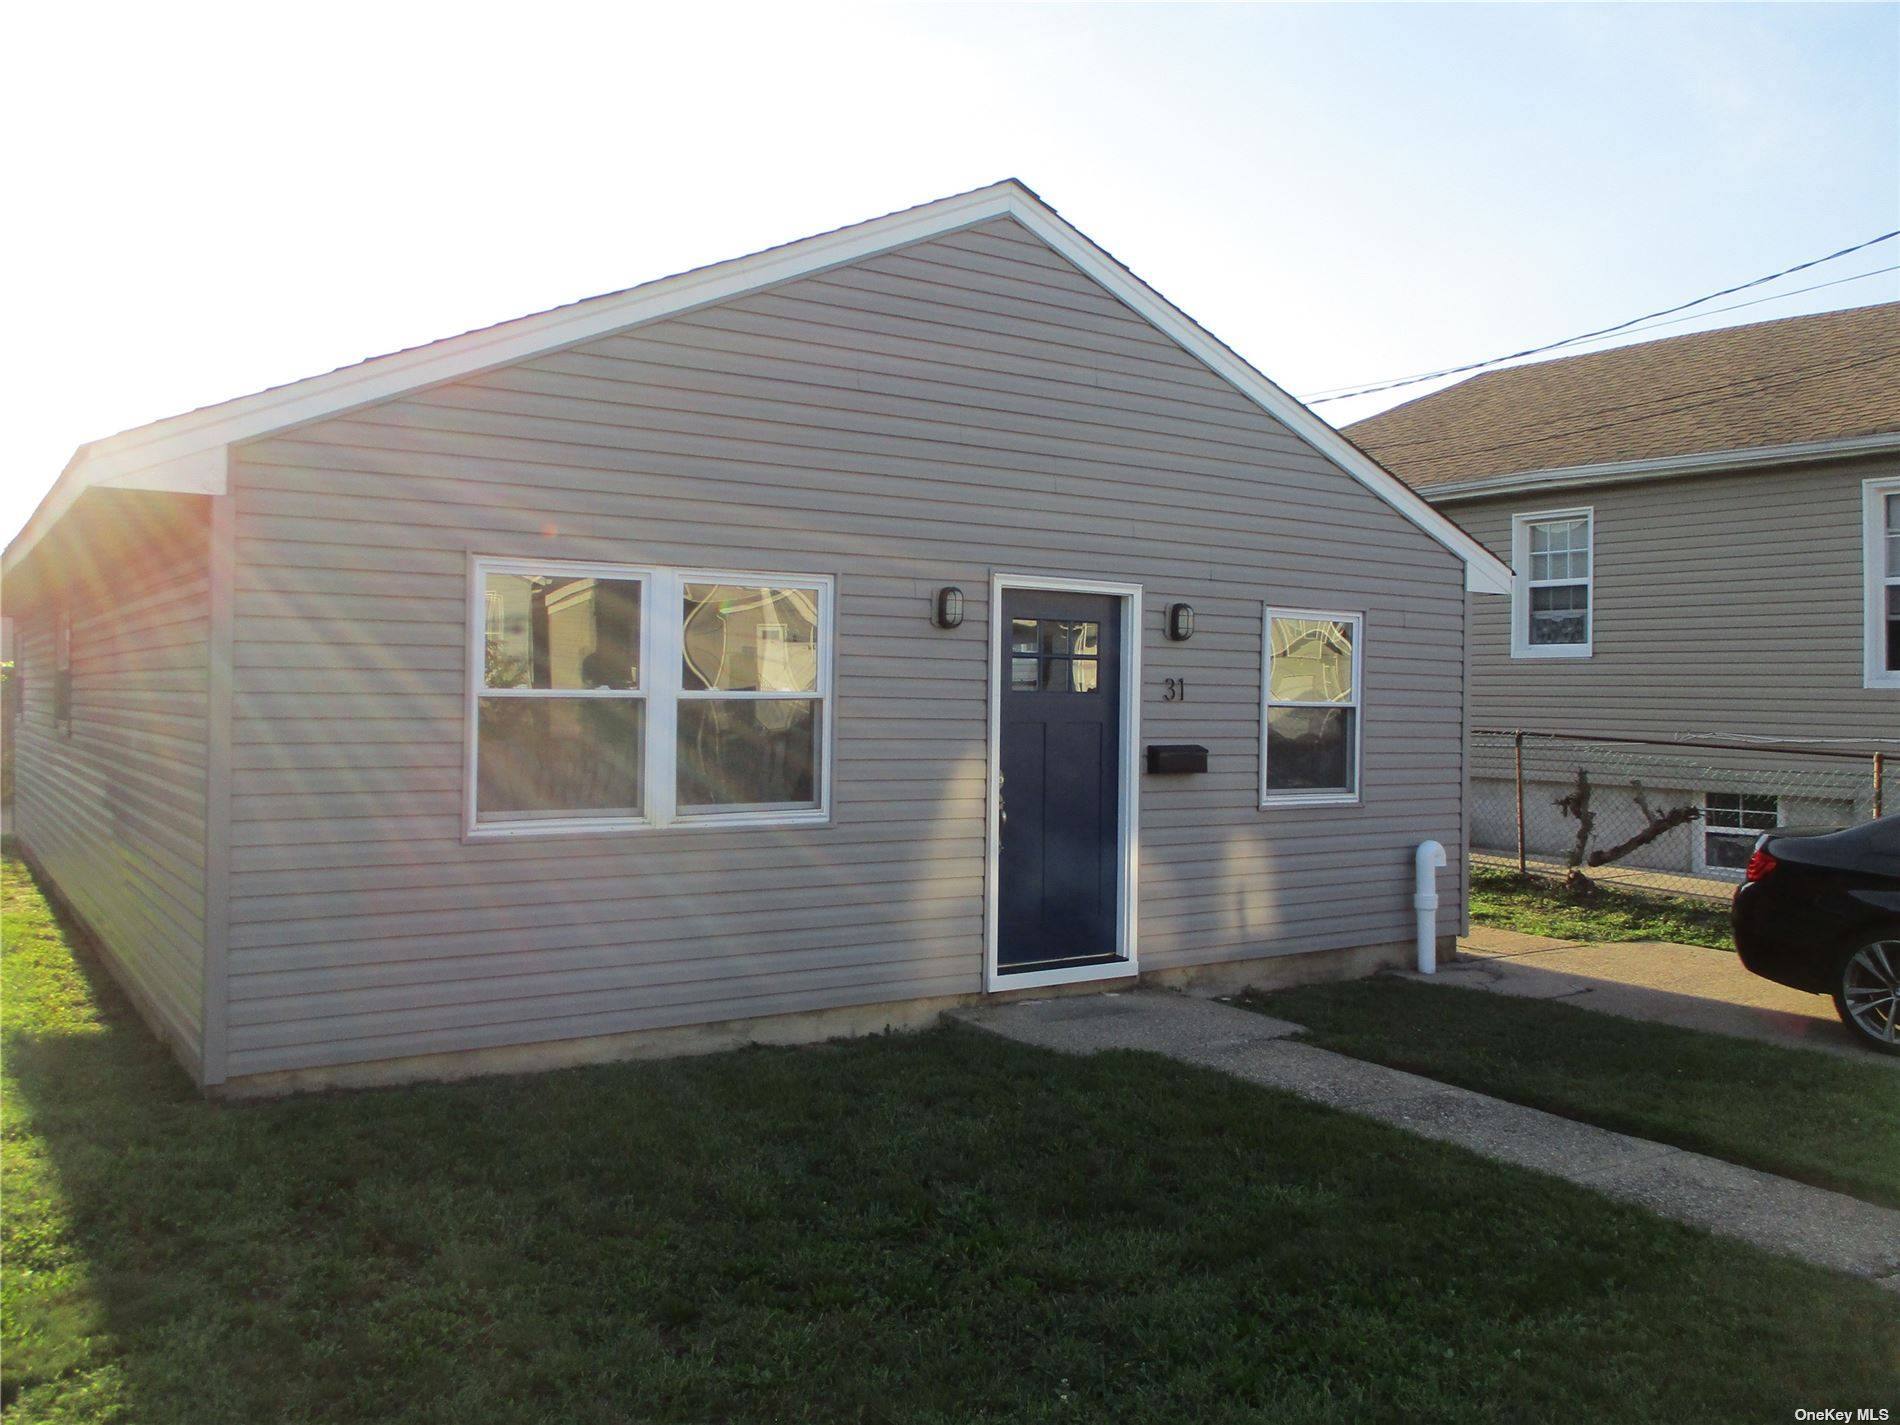 Totally renovated ranch. Granite Stainless EIK, L R, 3 bedrooms, gas heat, Sep hot water tank.